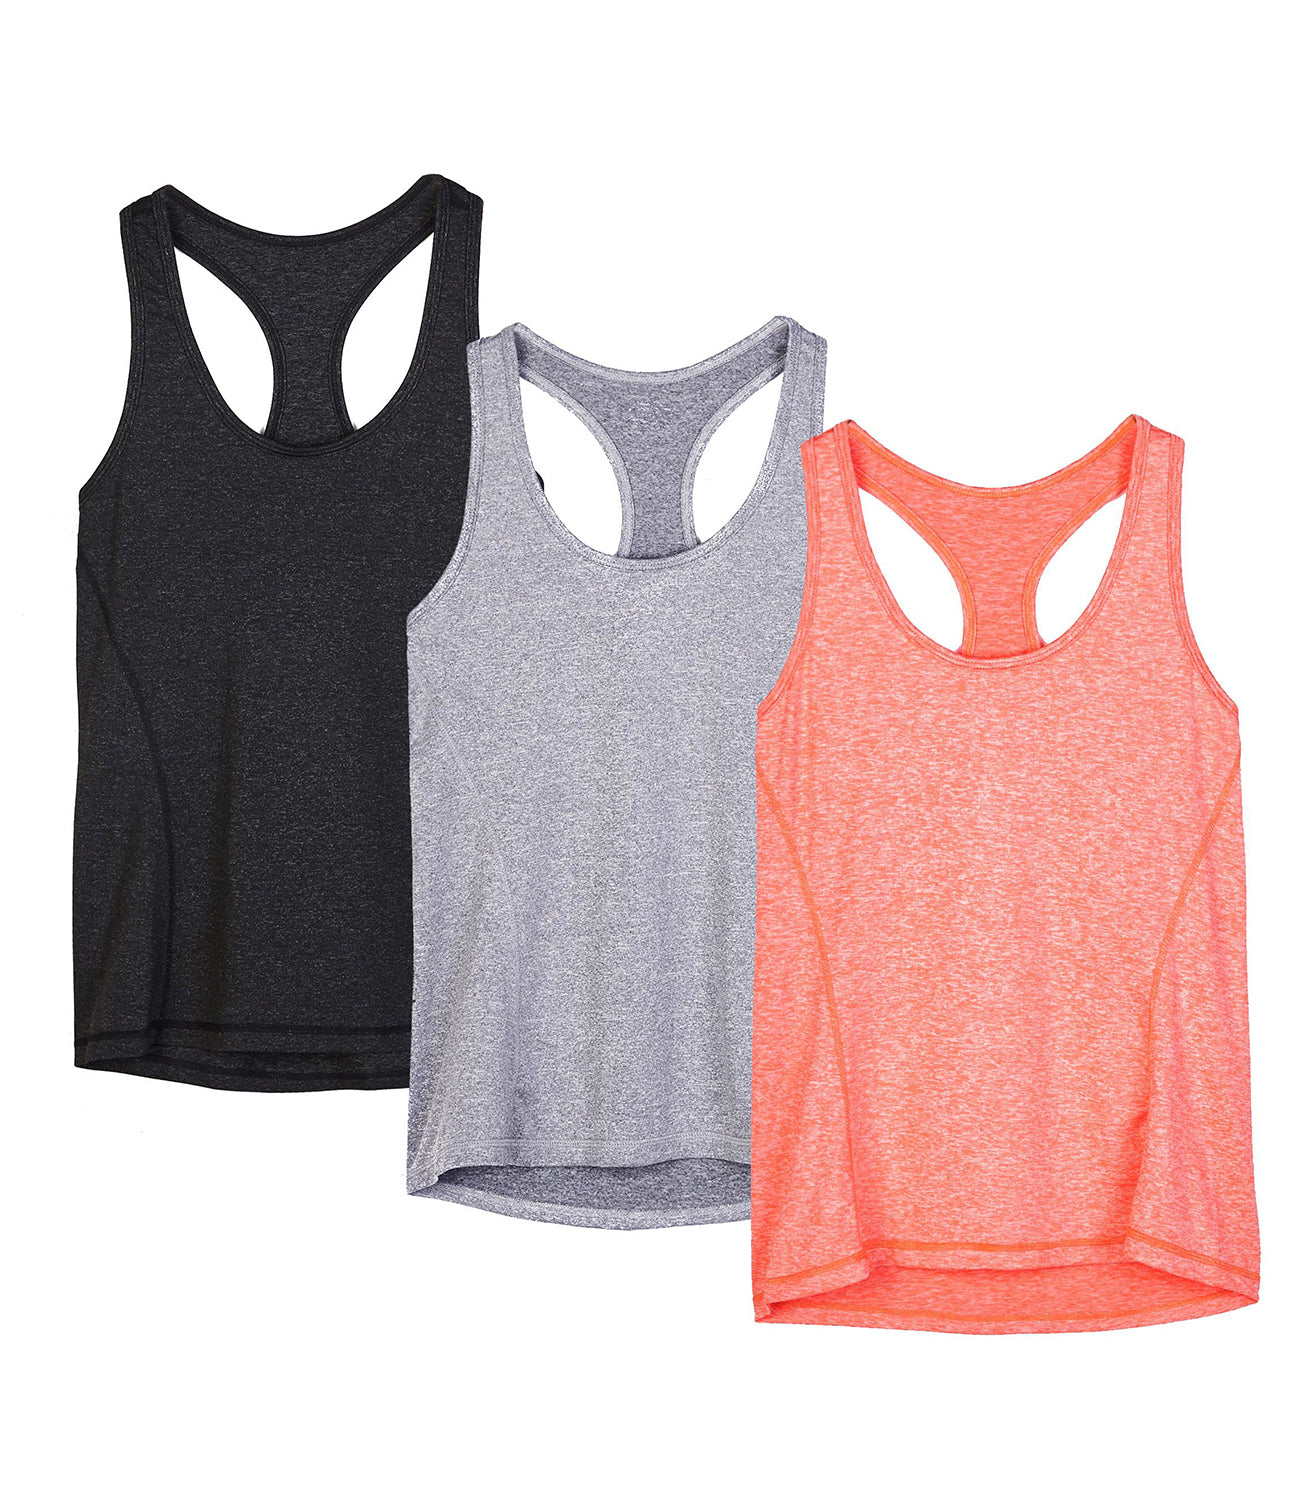 Loose Fit 2 In 1 Running Tank Tops Womens Top With Bra For Gym, Yoga, And  Workouts From Play_sports, $16.06